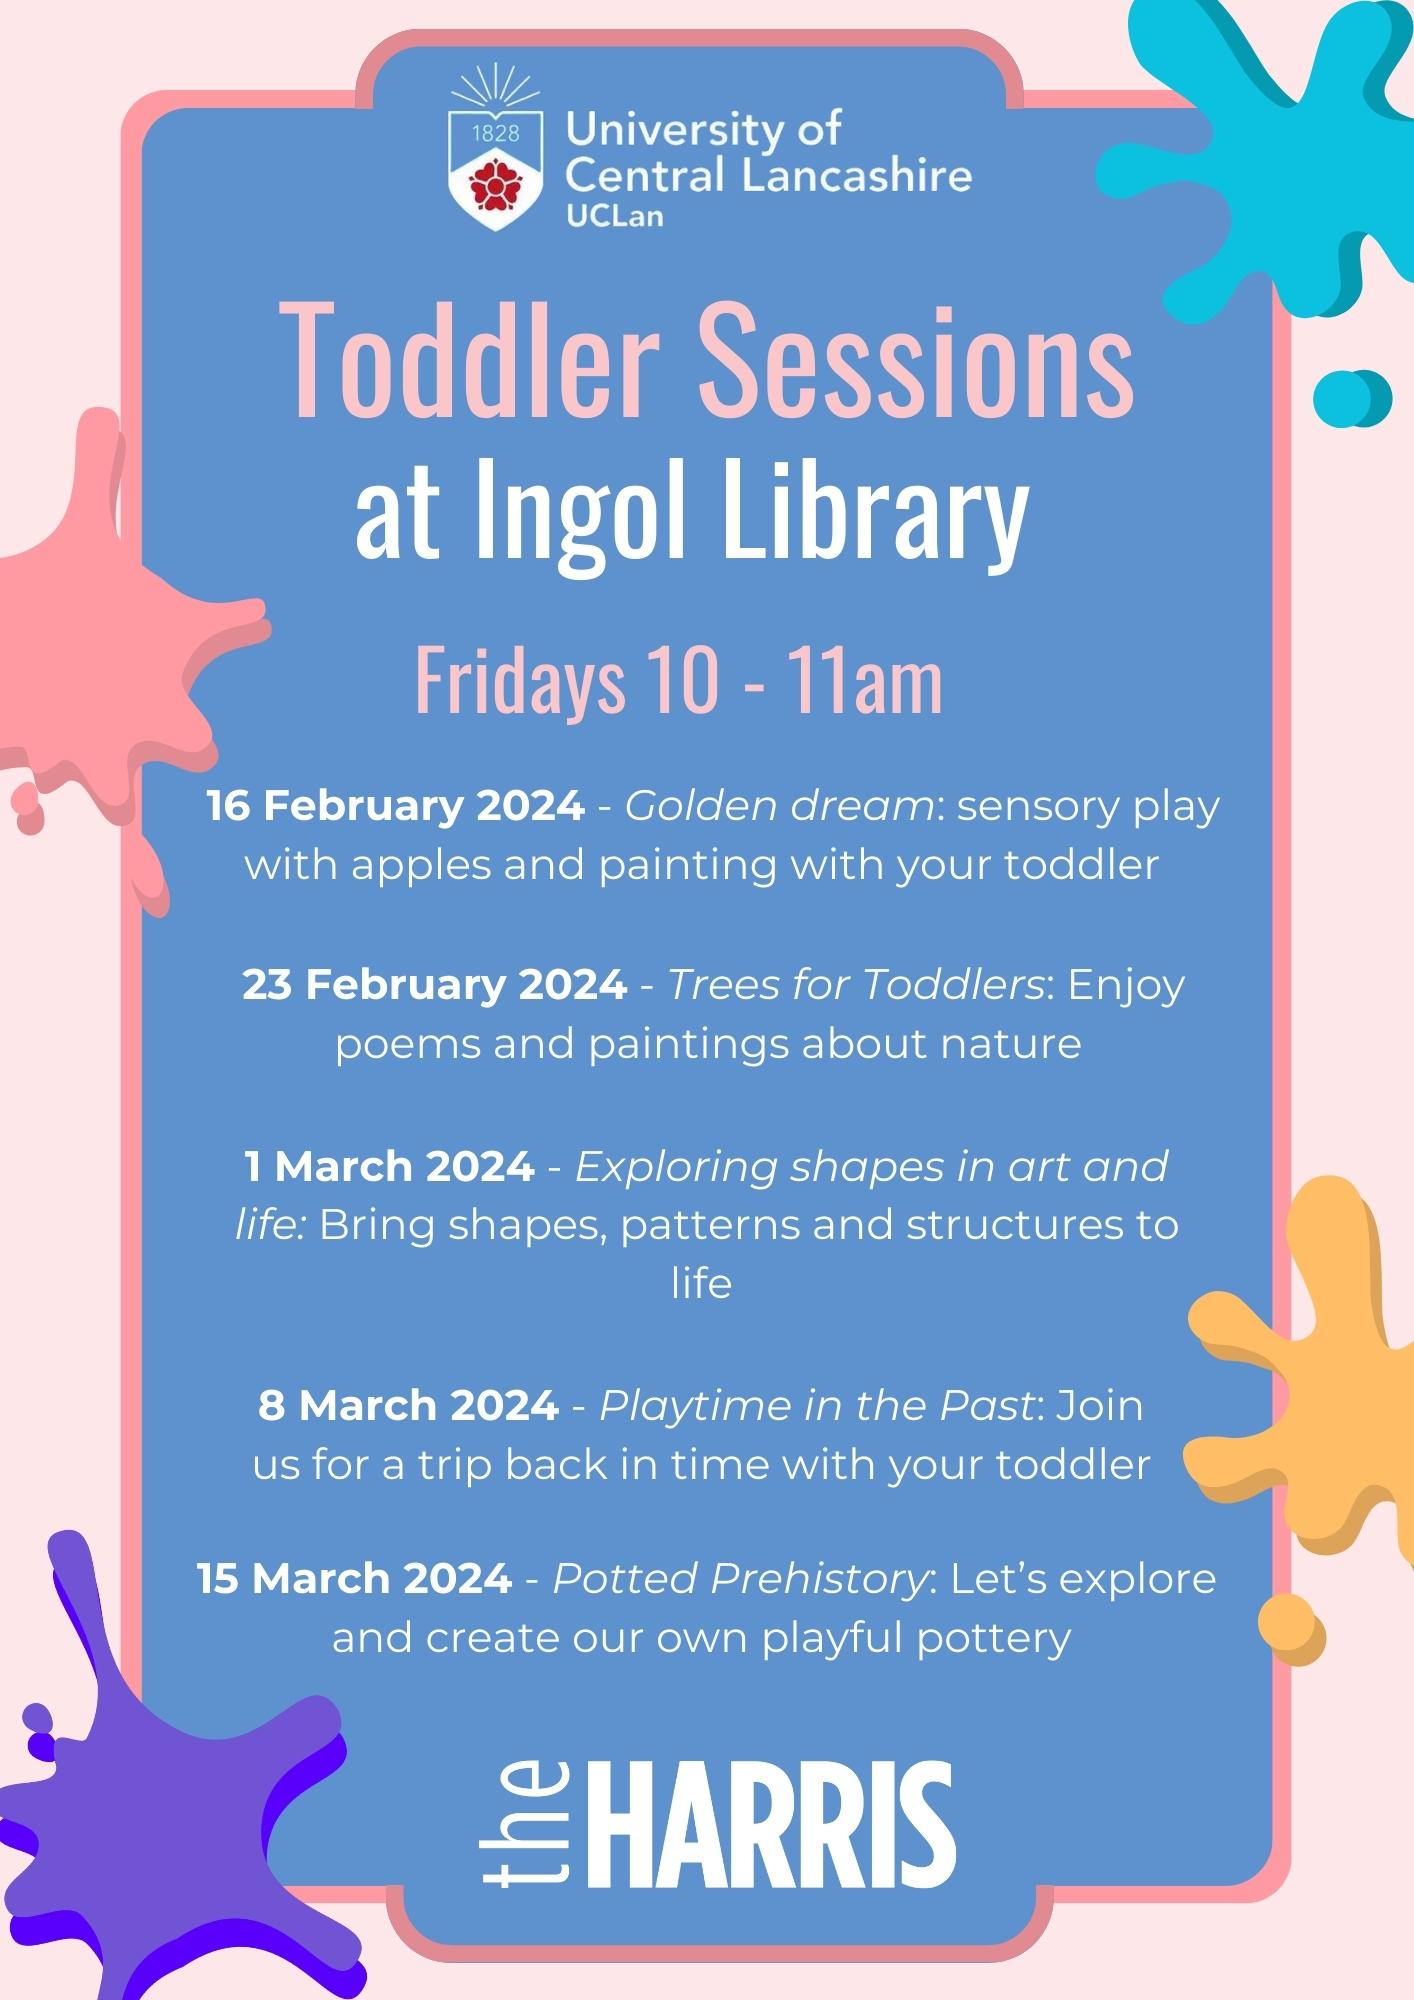 Image of a toddles sessions poster for Ingol Library 